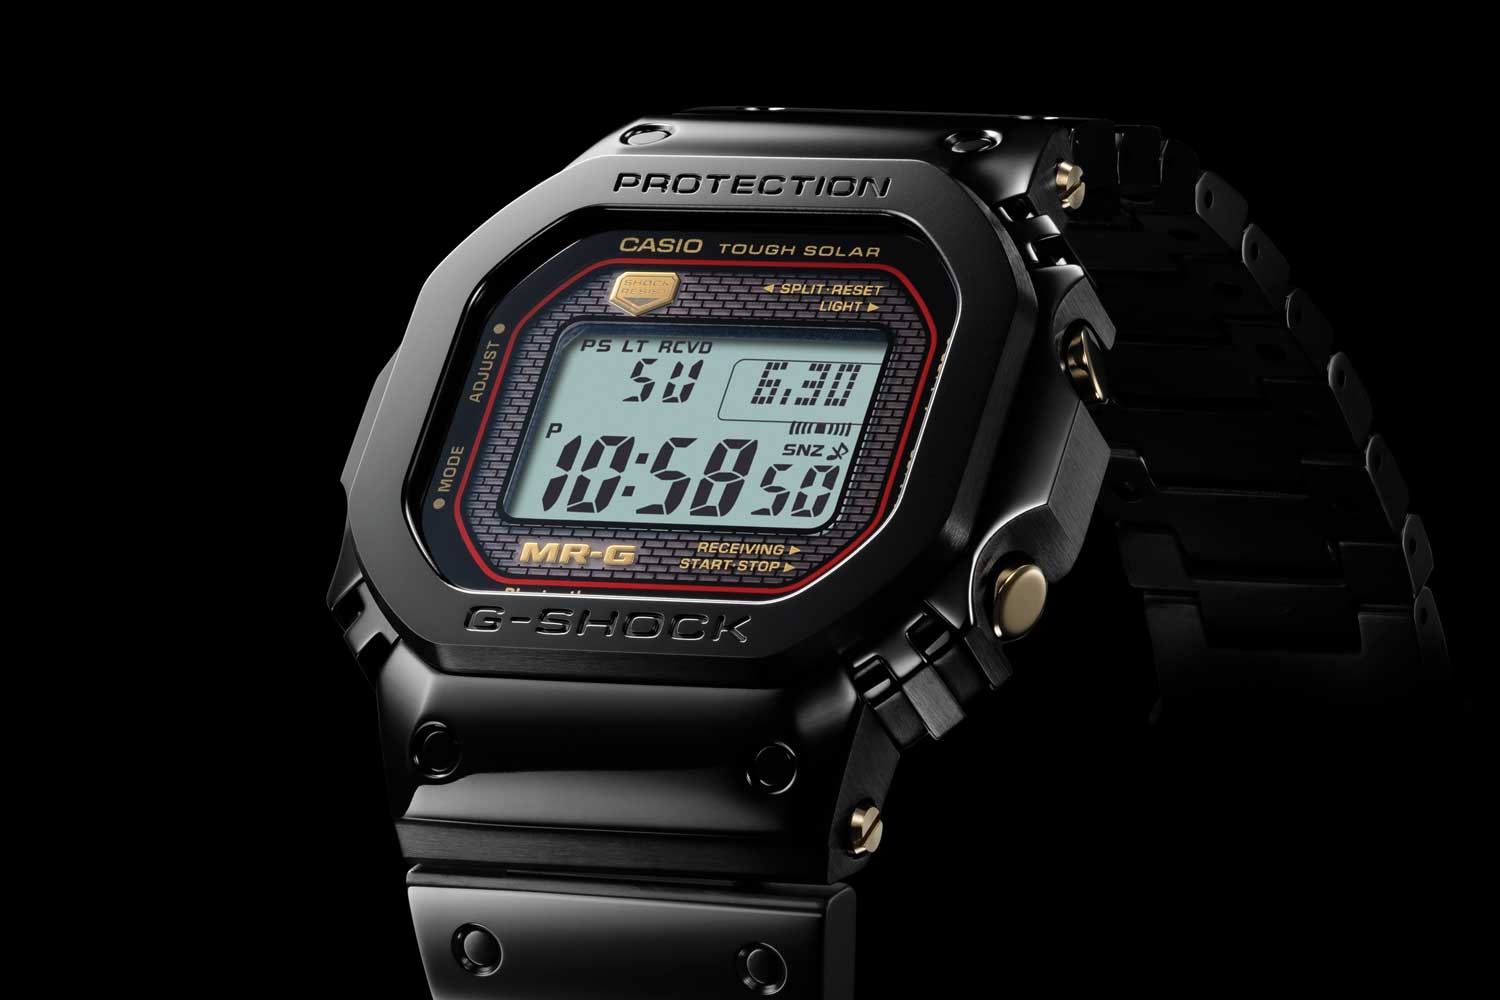 In hardened black DLC titanium, the MRG-B5000D strikes a sleek pose that nods to the past and yet looks resolutely forward to the future